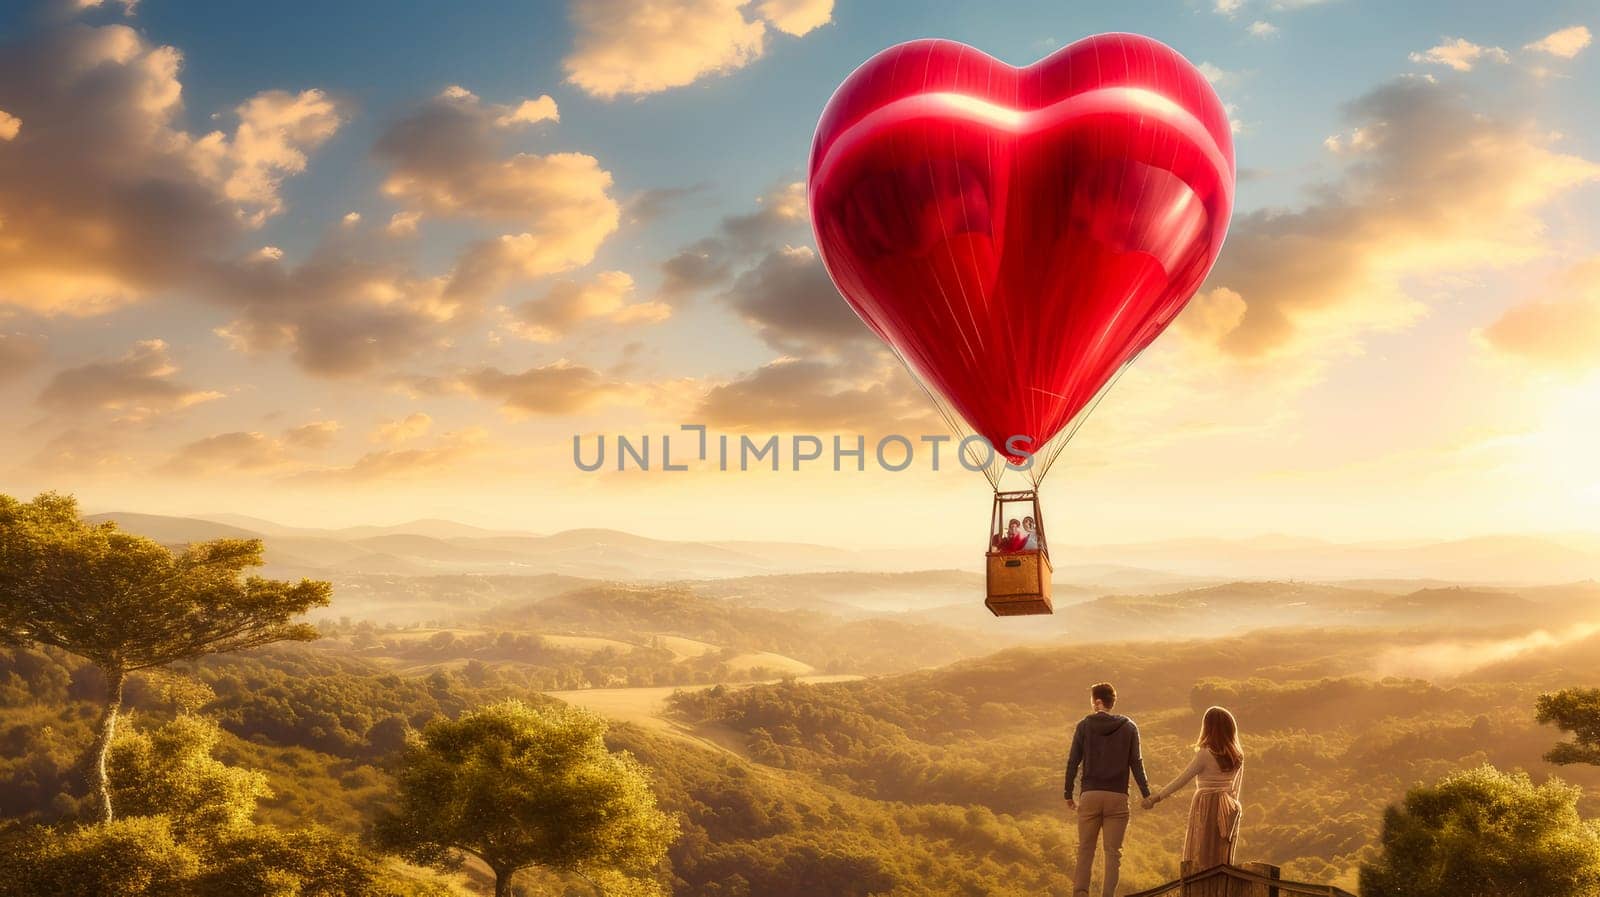 A couple in love is flying on a large, red, heart-shaped balloon high in the clouds above the mountains, at sunset. Emotions, balloonists, extreme sports. by Alla_Yurtayeva